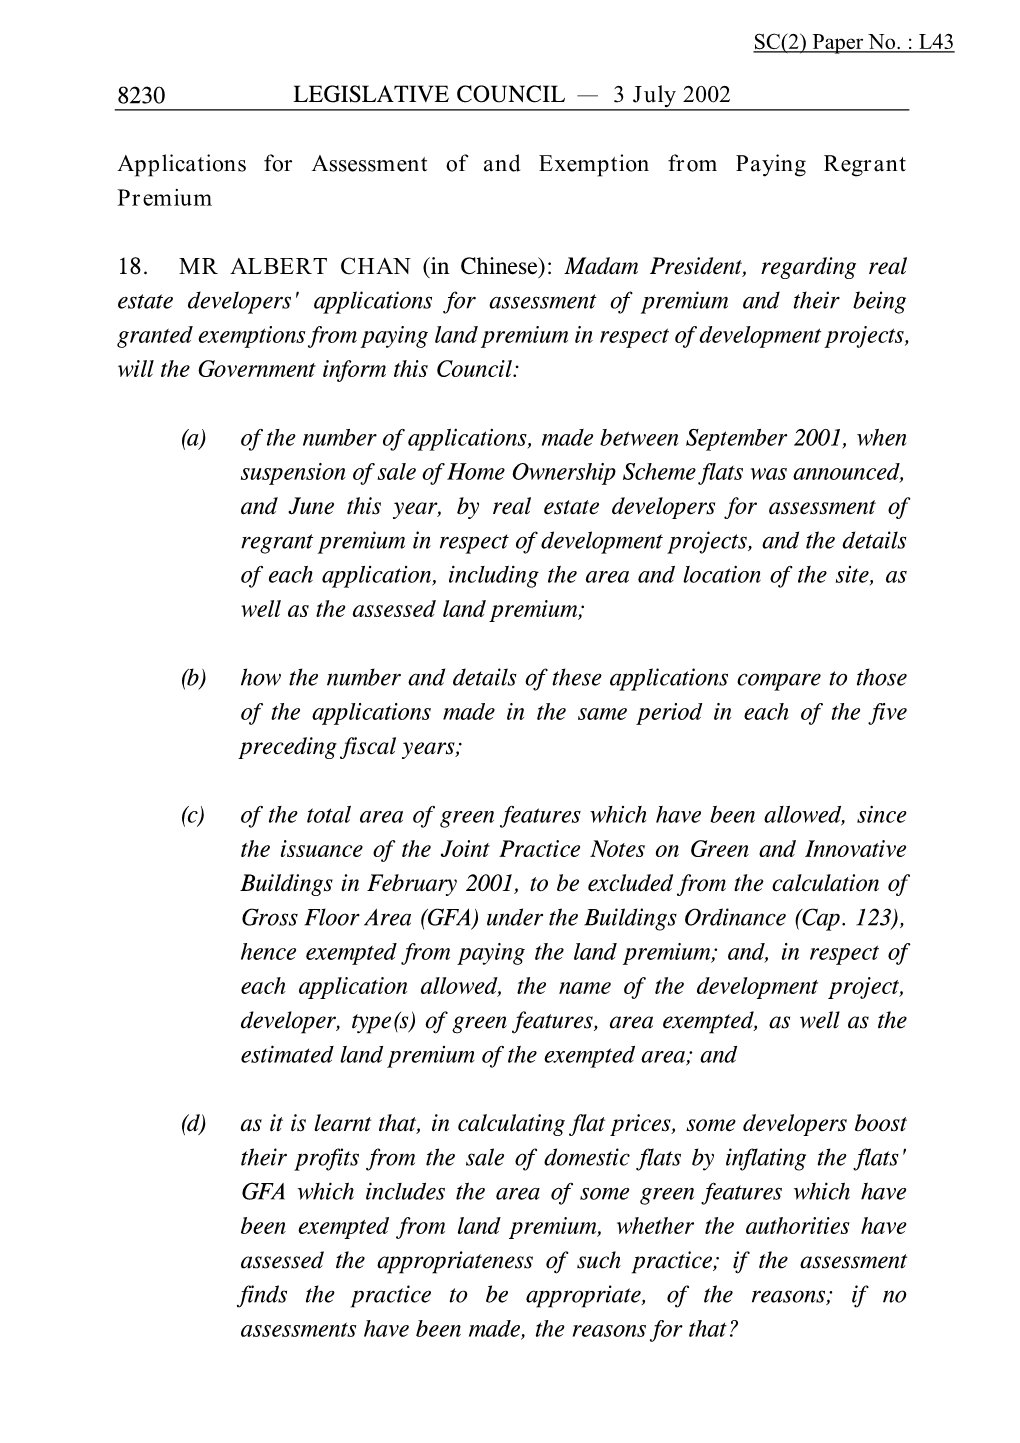 LEGISLATIVE COUNCIL 3 July 2002 8230 Applications for Assessment of and Exemption from Paying Regrant Premium 18. MR ALBERT